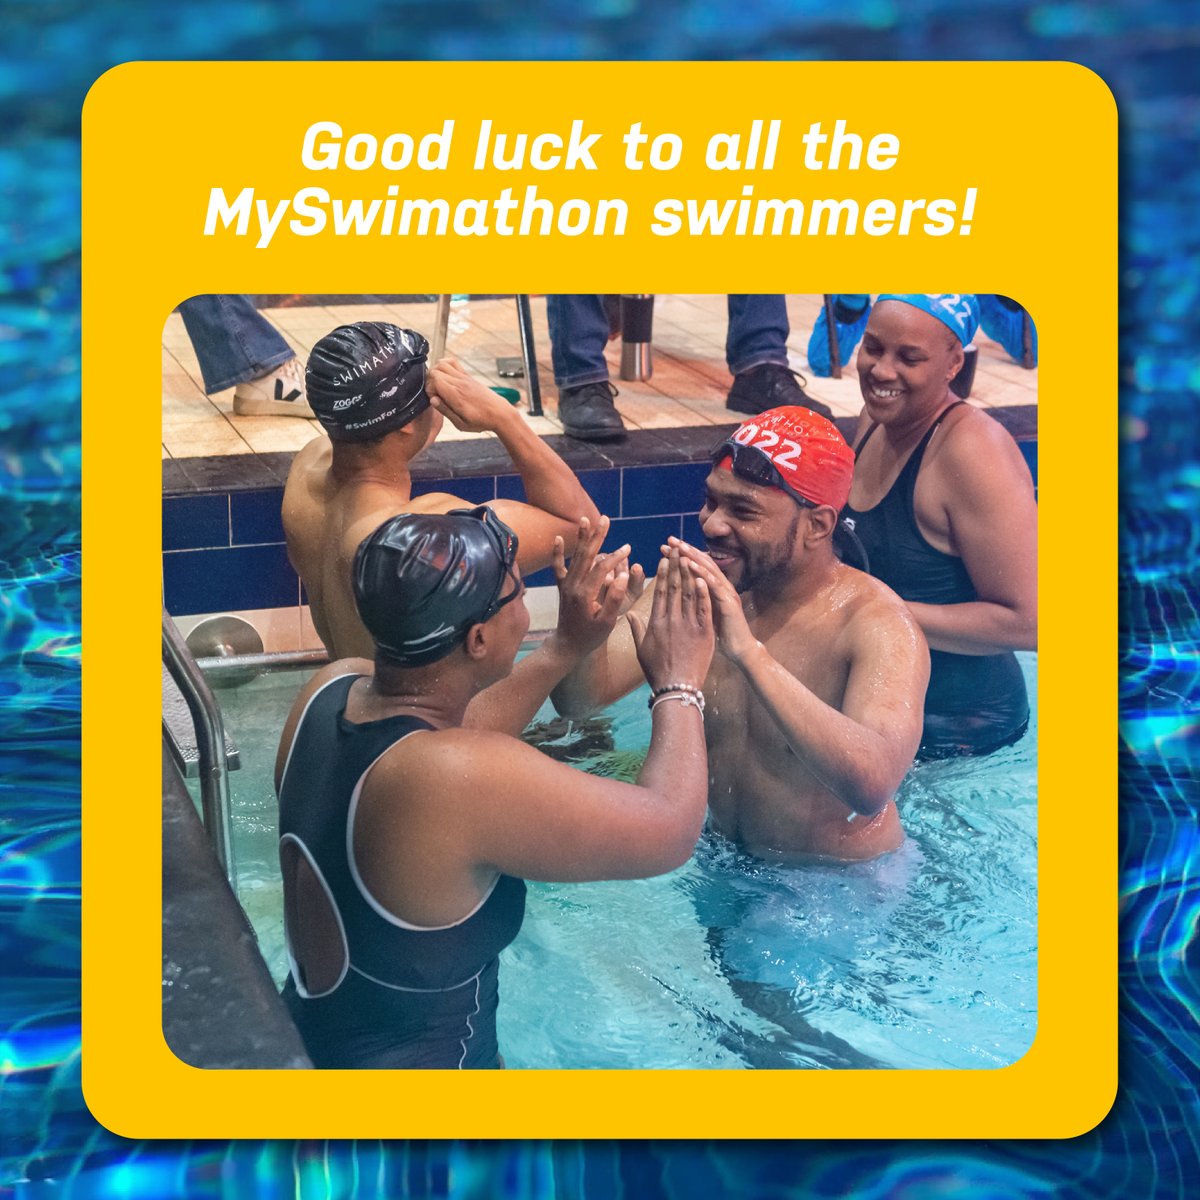 🎉 MySwimathon starts today! 🎉 Good luck to the thousands of swimmers taking part between now and May 5th - you got this! #YourSwimathon #MySwimathon #Swimathon2024